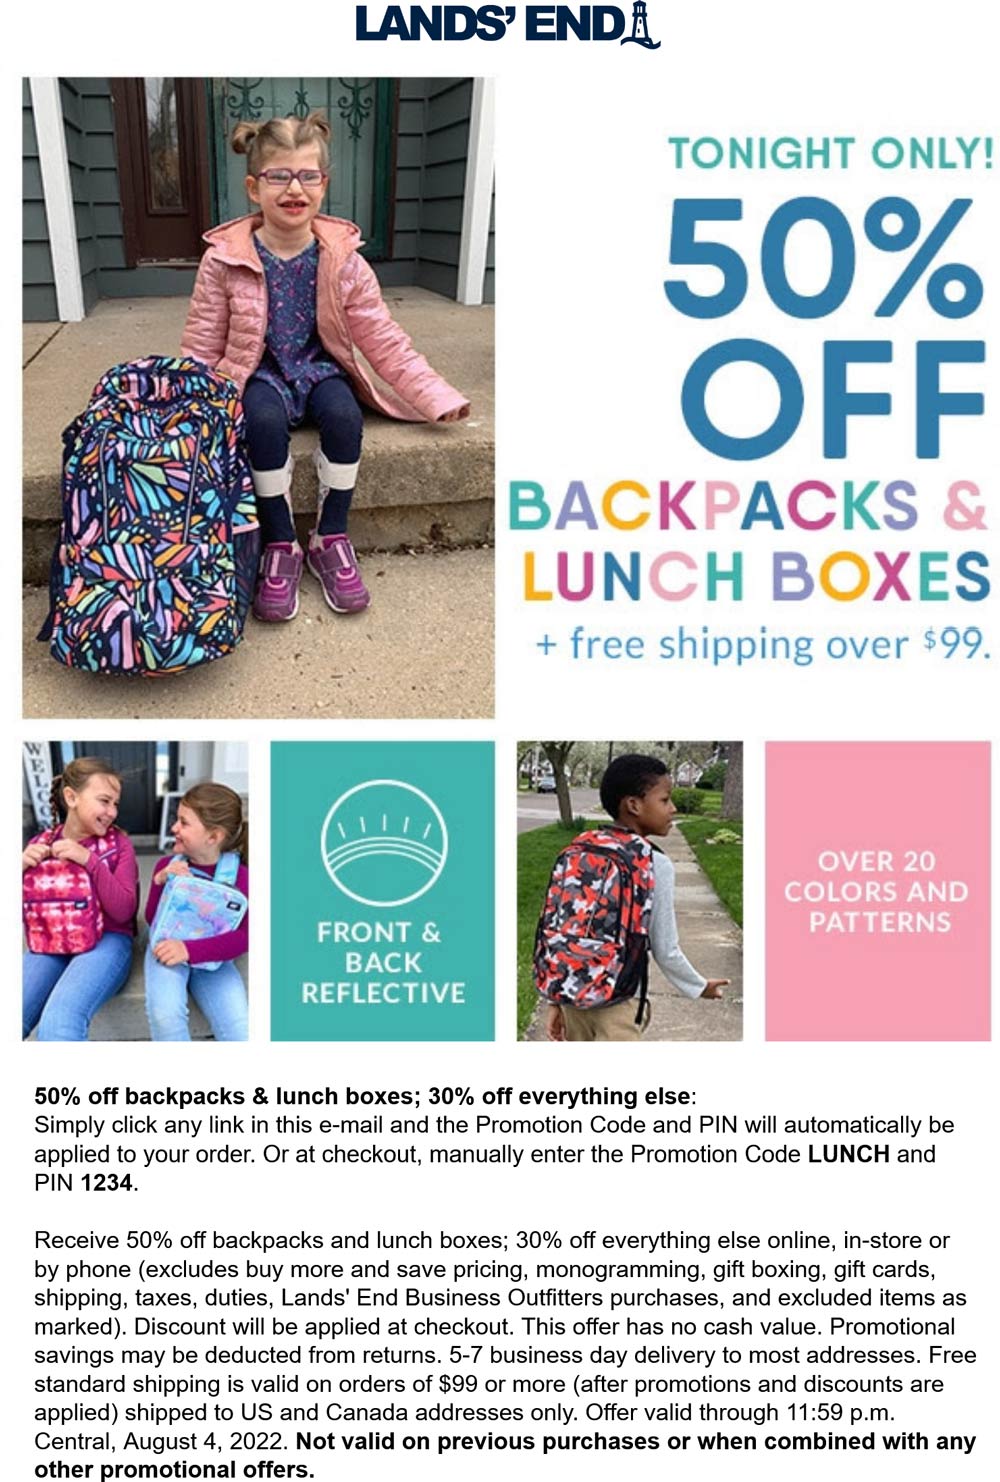 Lands End restaurants Coupon  50% off backpacks & lunch boxes + 30% everything else today at Lands End via promo code LUNCH and pin 1234 #landsend 